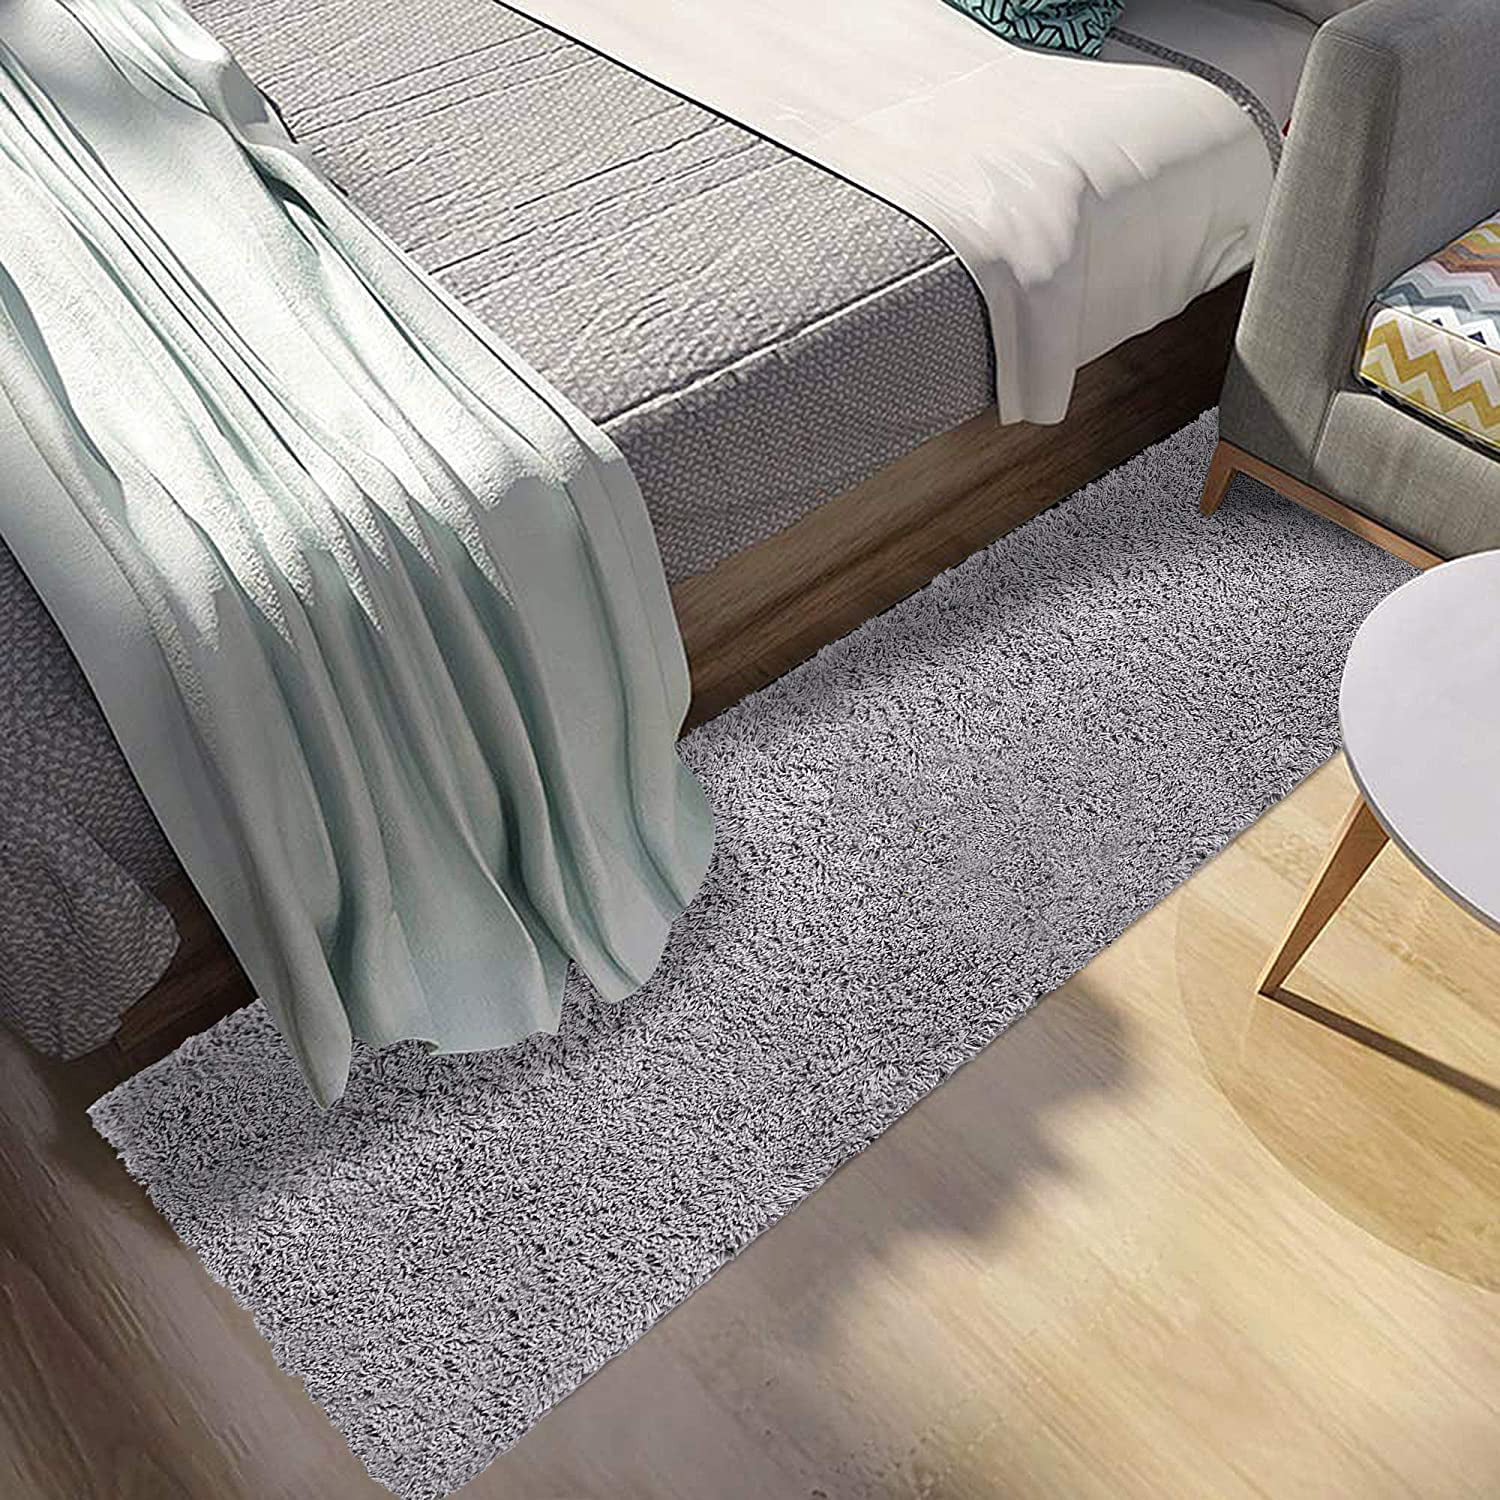 Diffuse Nebula Soft Modern Area Rug for Living Room Bedroom Kids Room Rugs 3D Print for Iving Room Bedroom Office Decor Indoor Carpet 16 X 24 Inches 